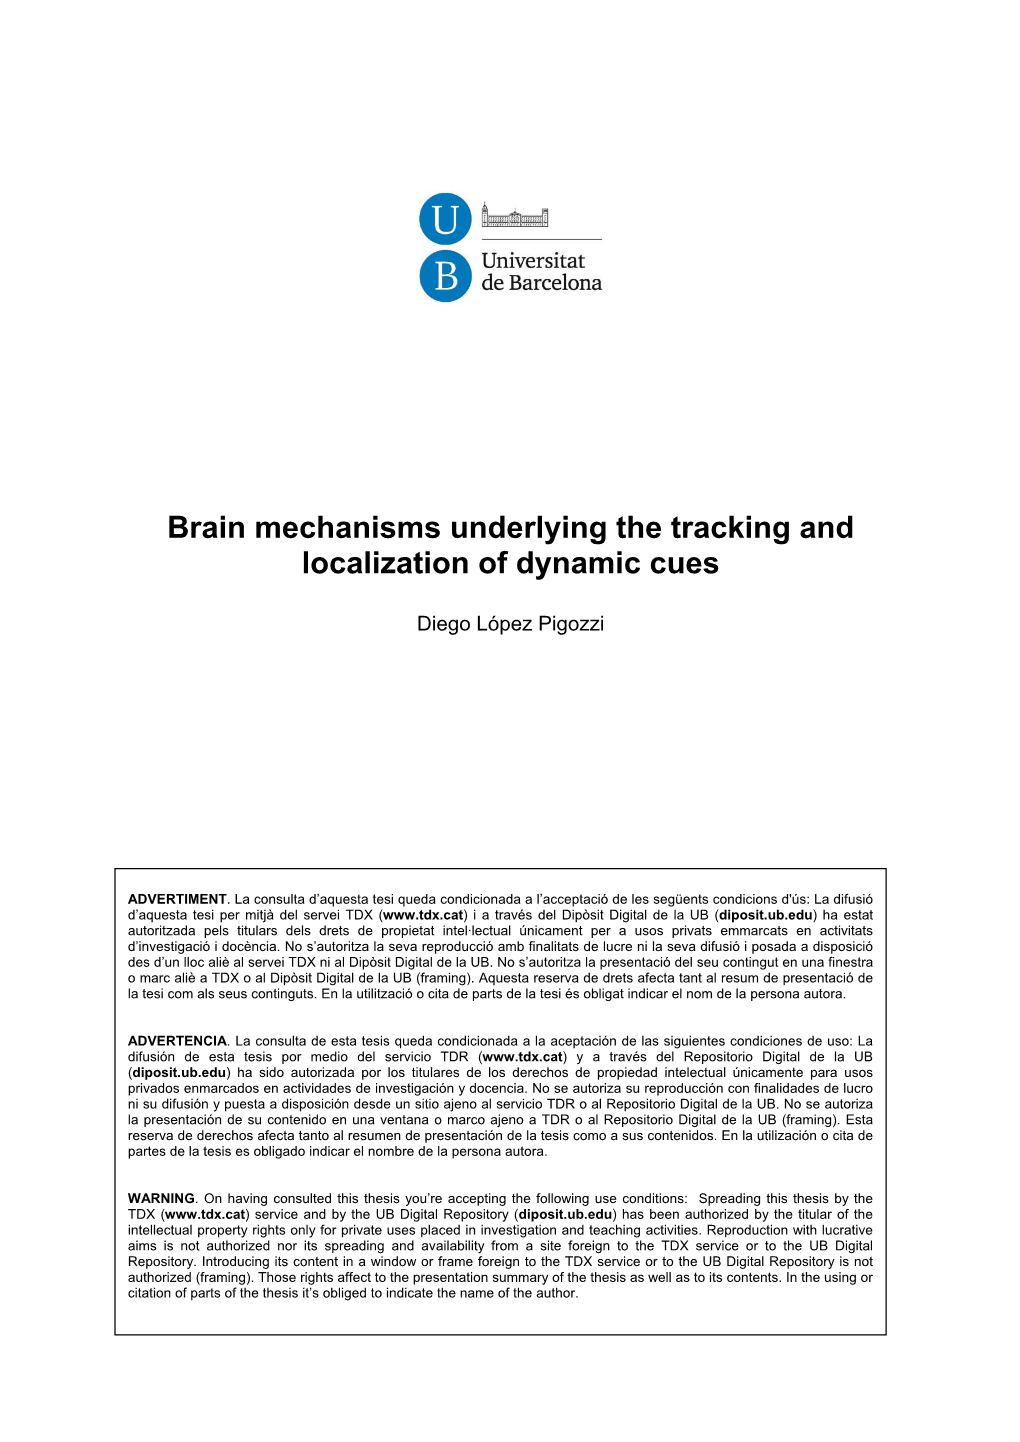 Brain Mechanisms Underlying the Tracking and Localization of Dynamic Cues